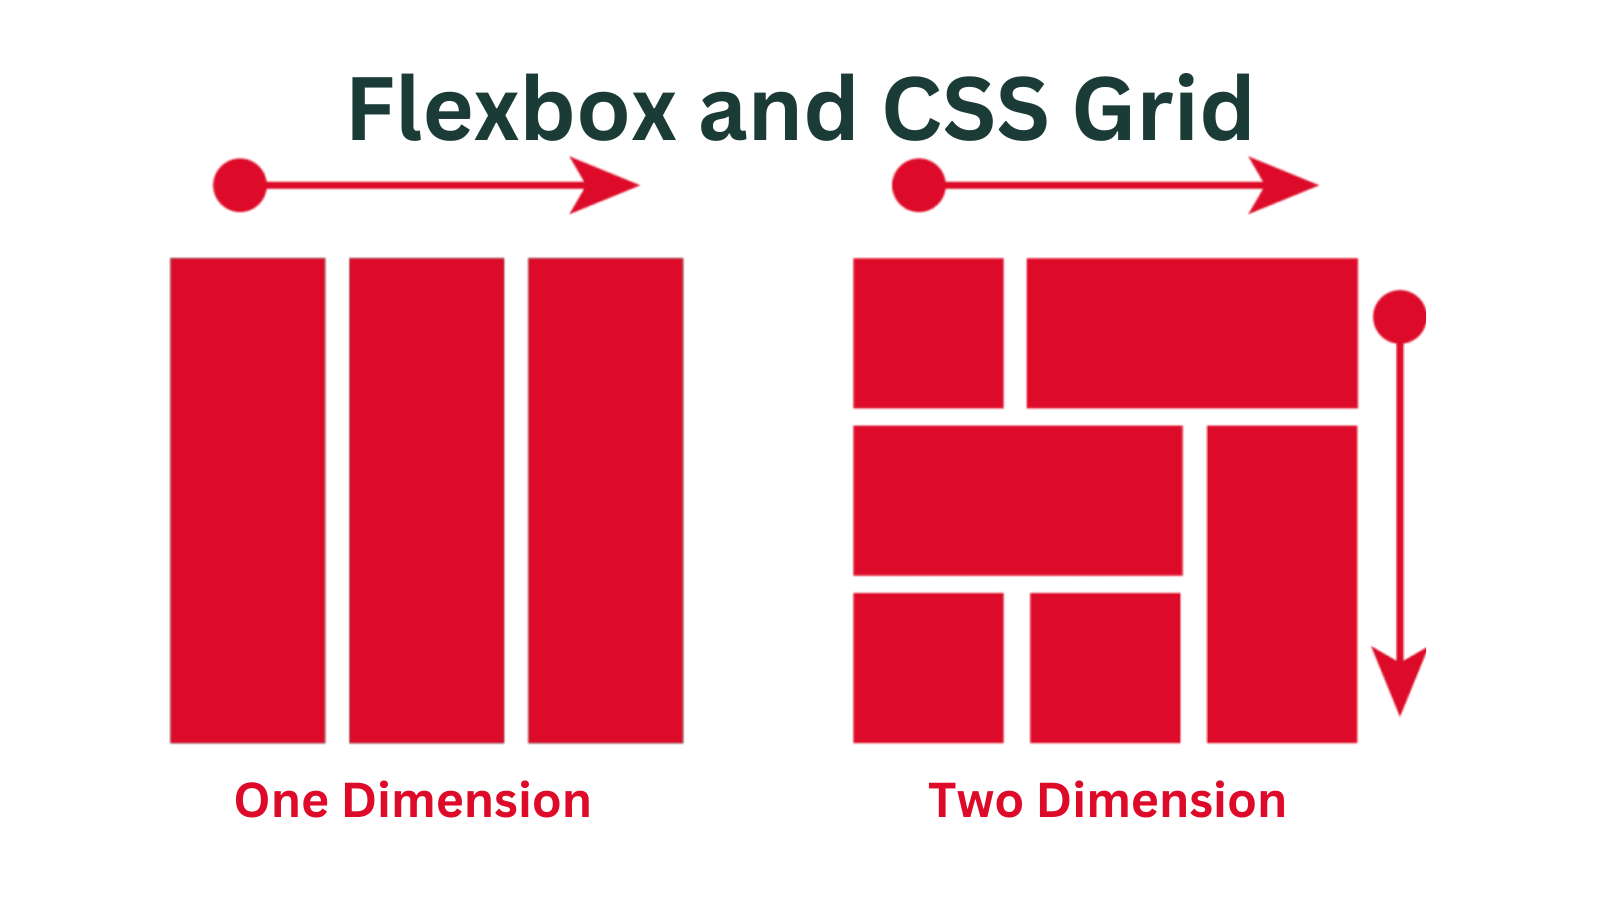 Flexbox and CSS Grid